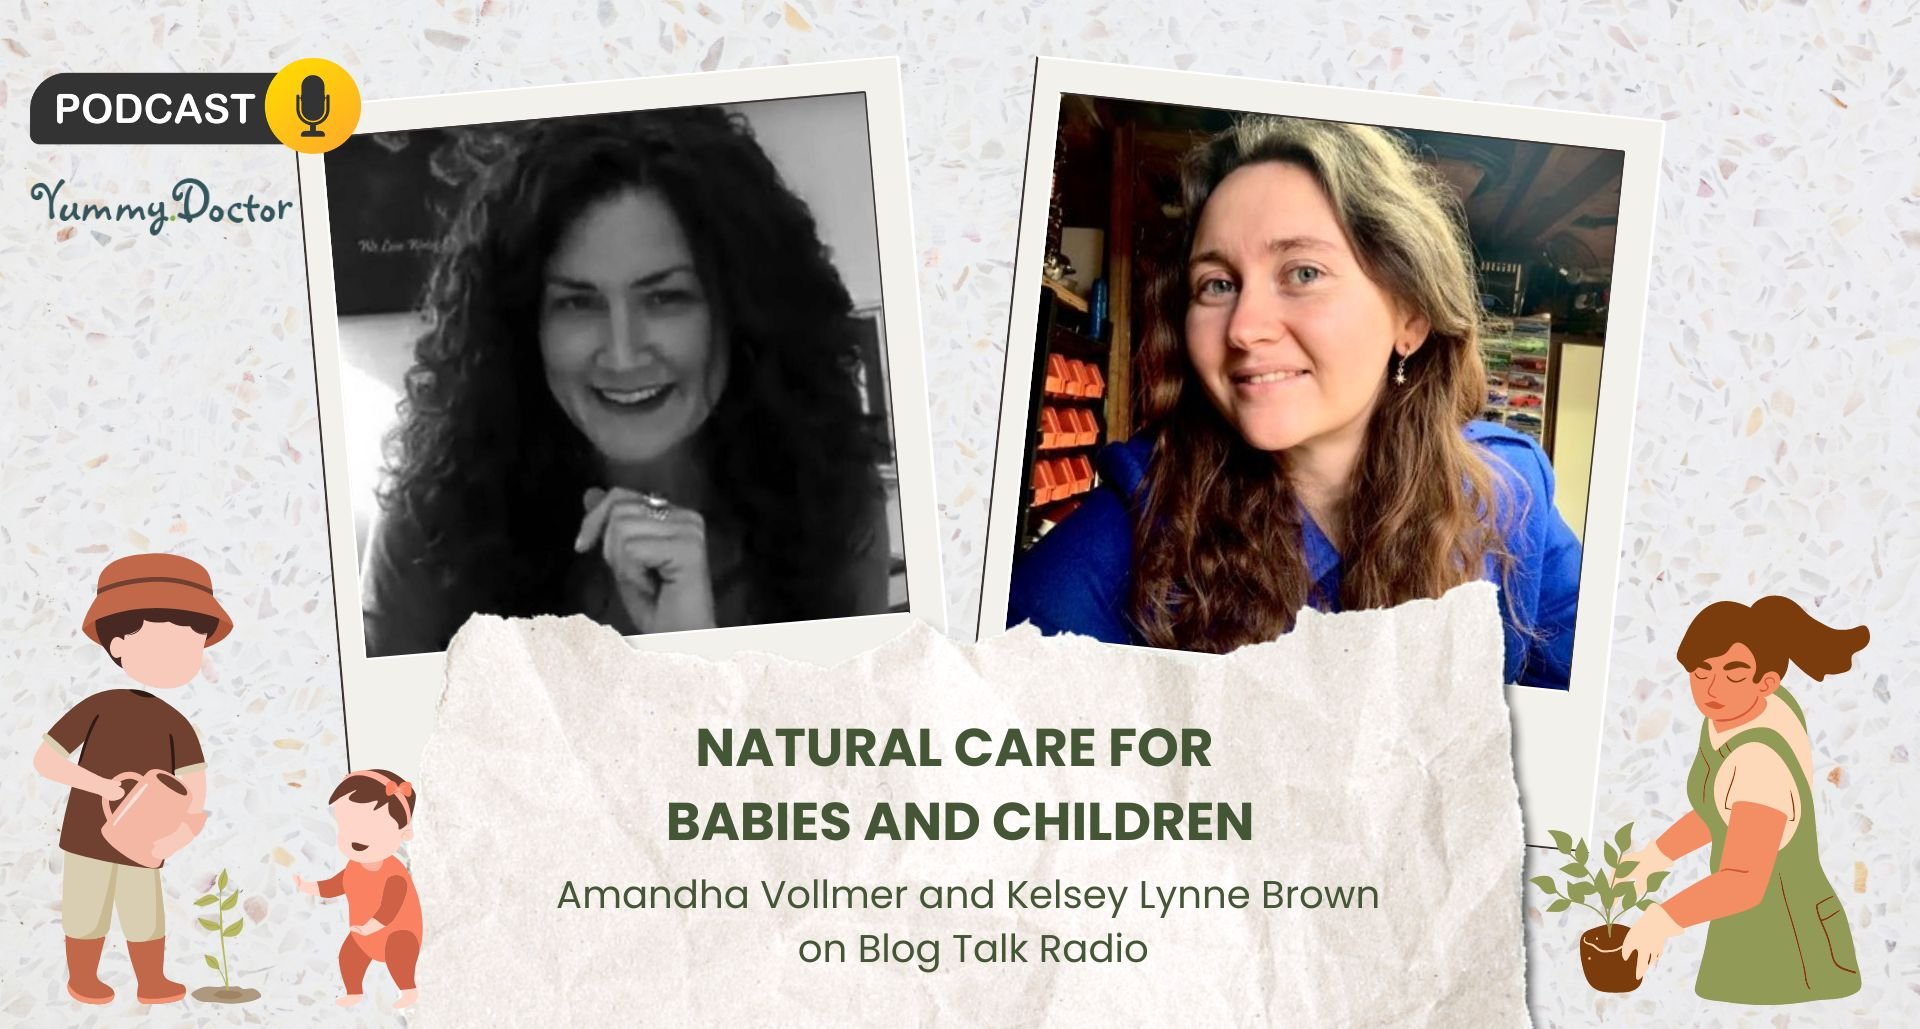 Natural Care for Babies and Children with Amandha Vollmer (ADV) and Kelsey Lynne Brown on Blog Talk Radio